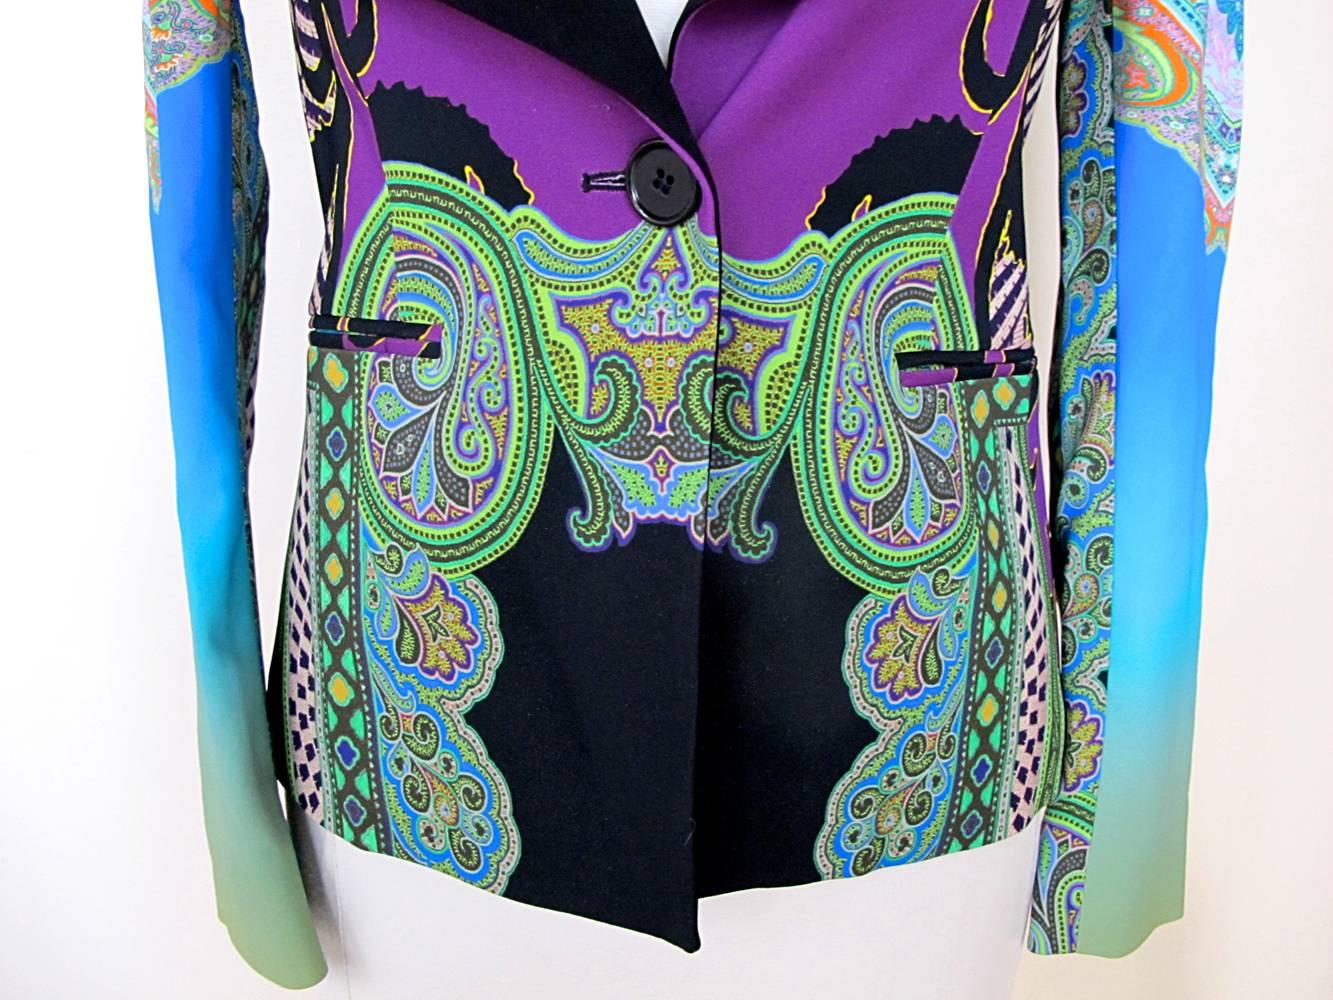 Colorful and bold black and multicolor Etro long sleeve blazer with paisley print throughout and blue and green gradient on bottom half of sleeves. Button closures at center front. 

Fabric: 86% Viscose, 10% Acetate, 6% Elastane

Measurements: Bust: